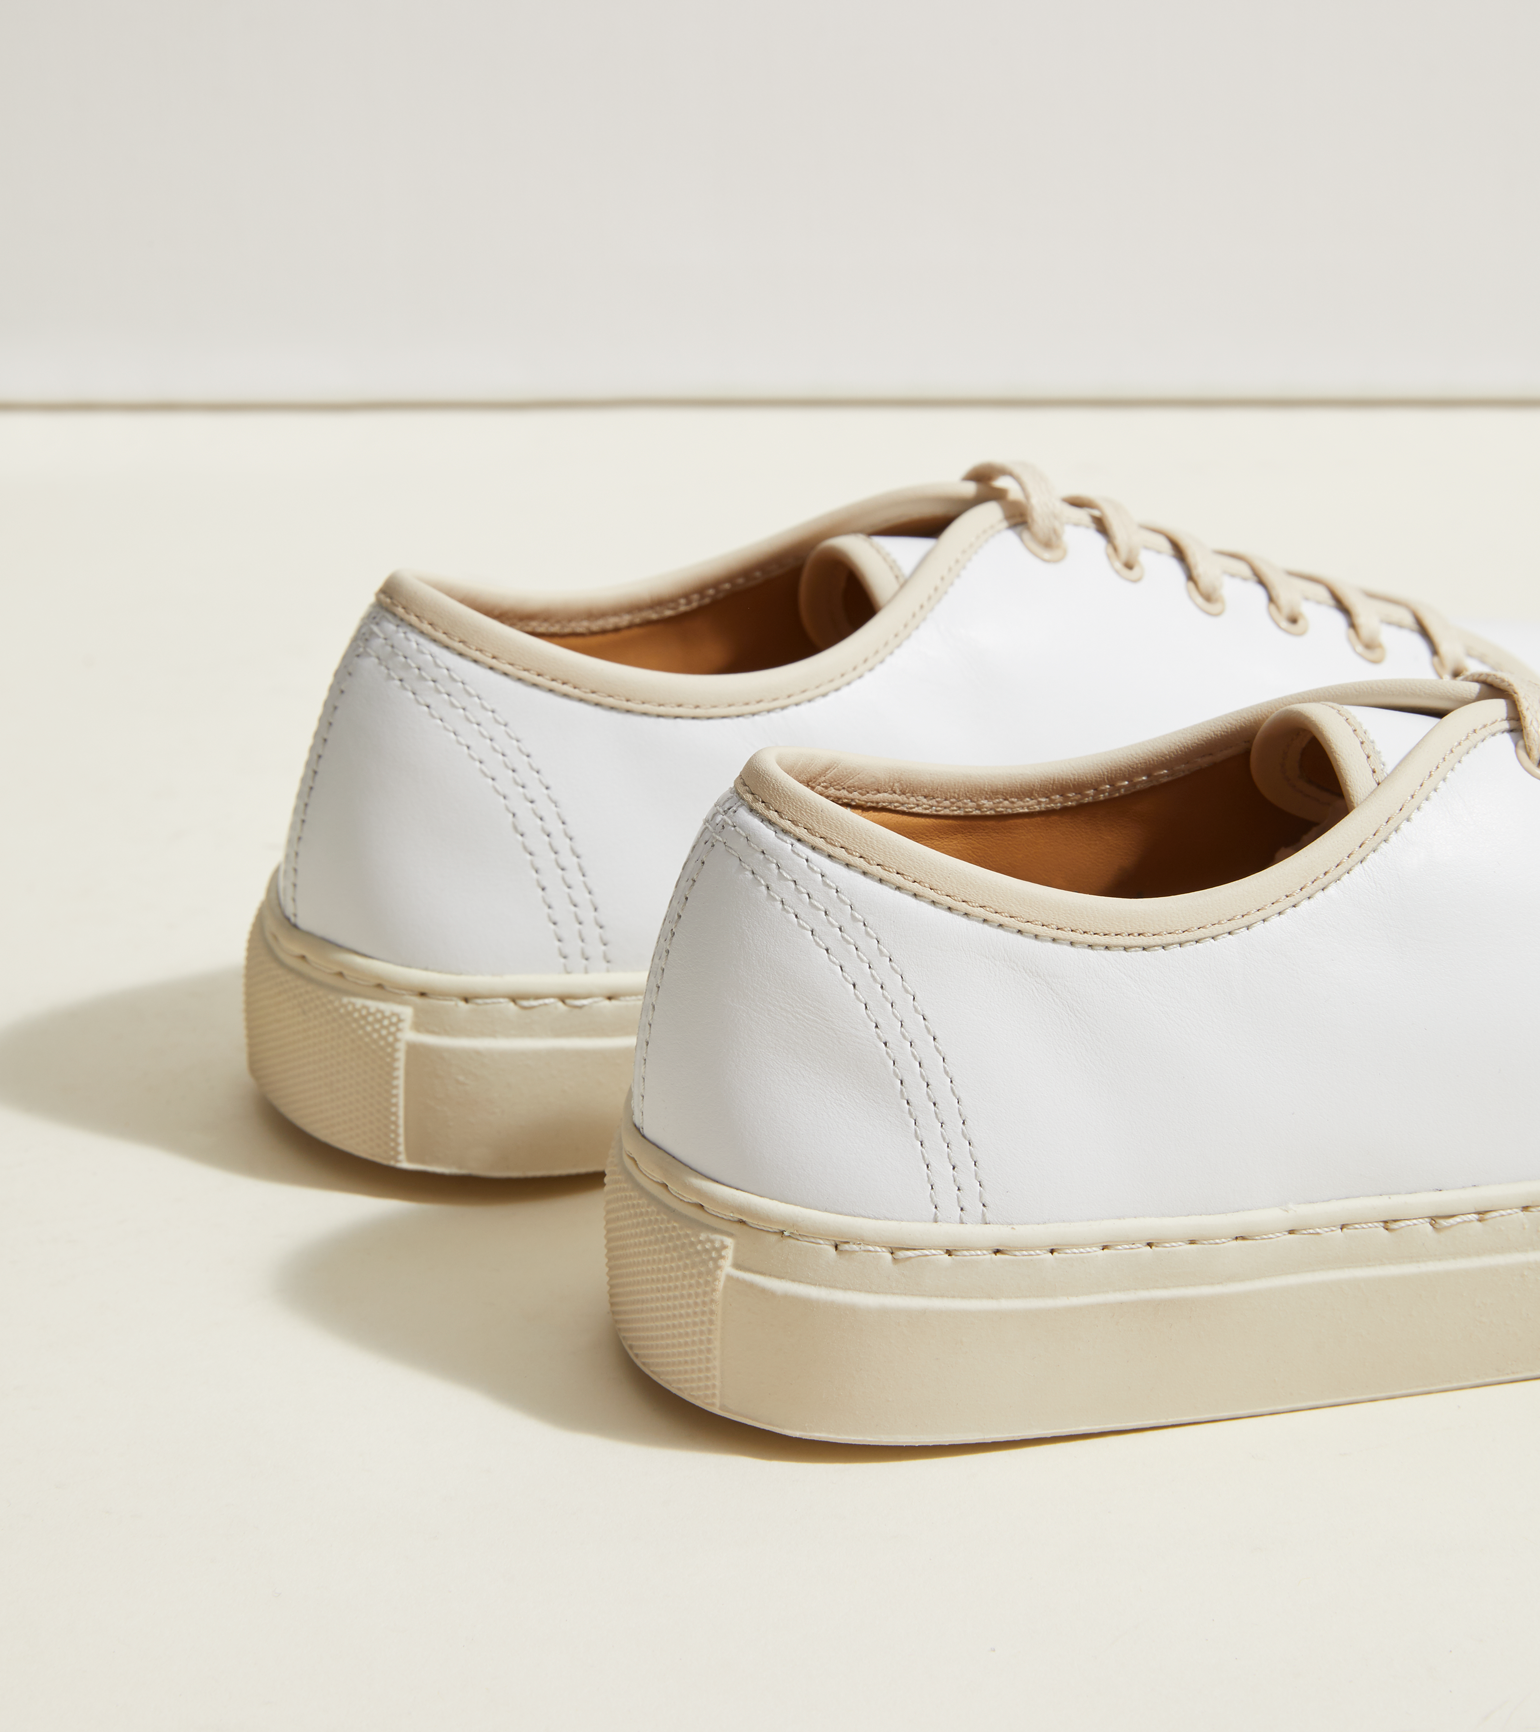 white leather sneakers with gum sole